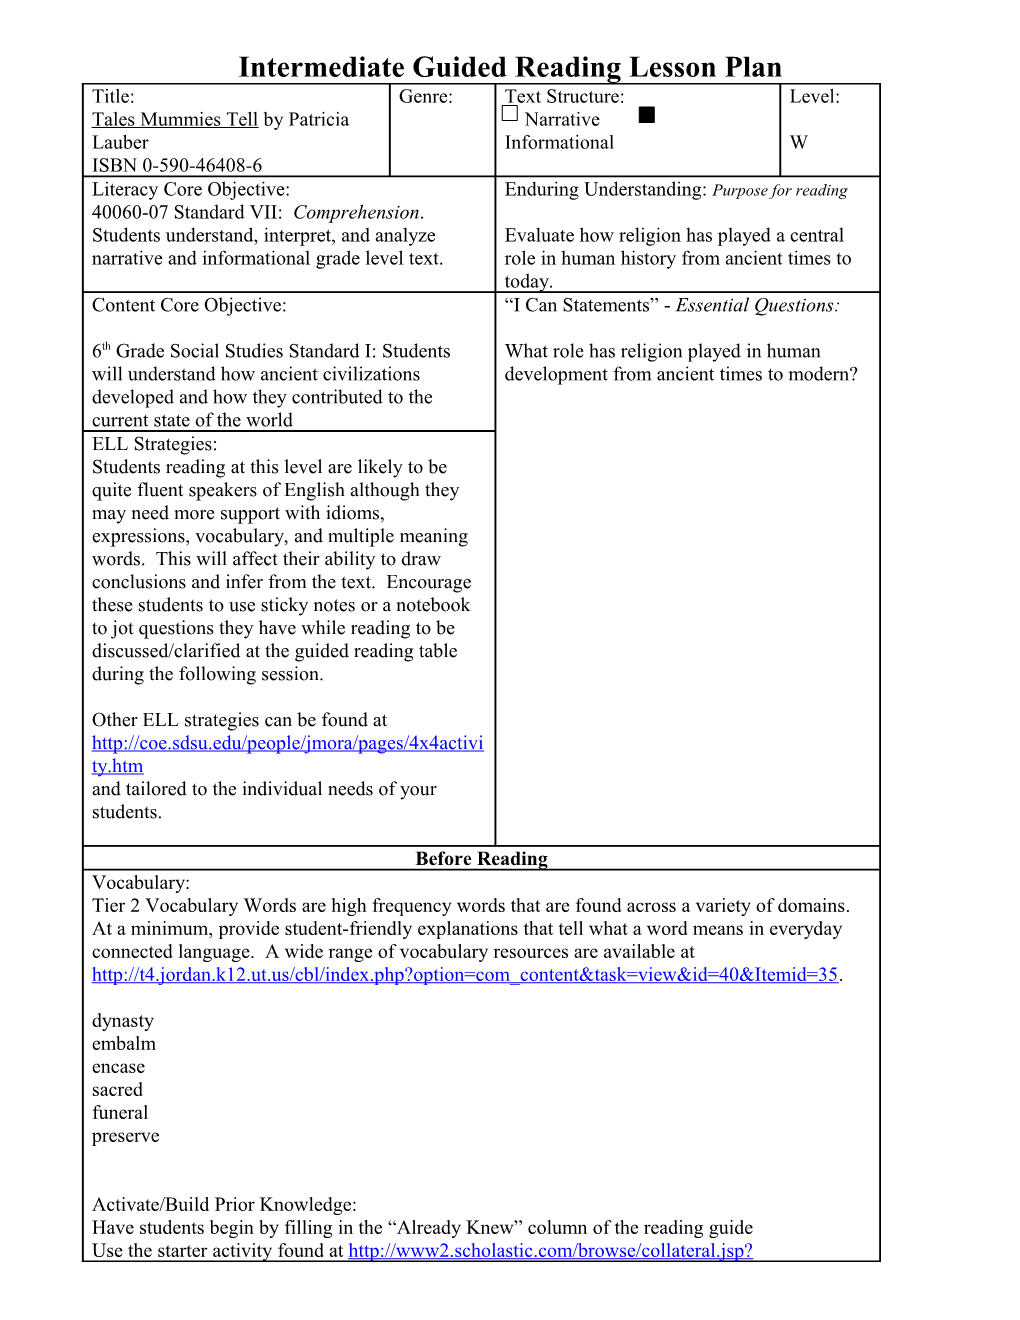 Primary Guided Reading Lesson Plan s8